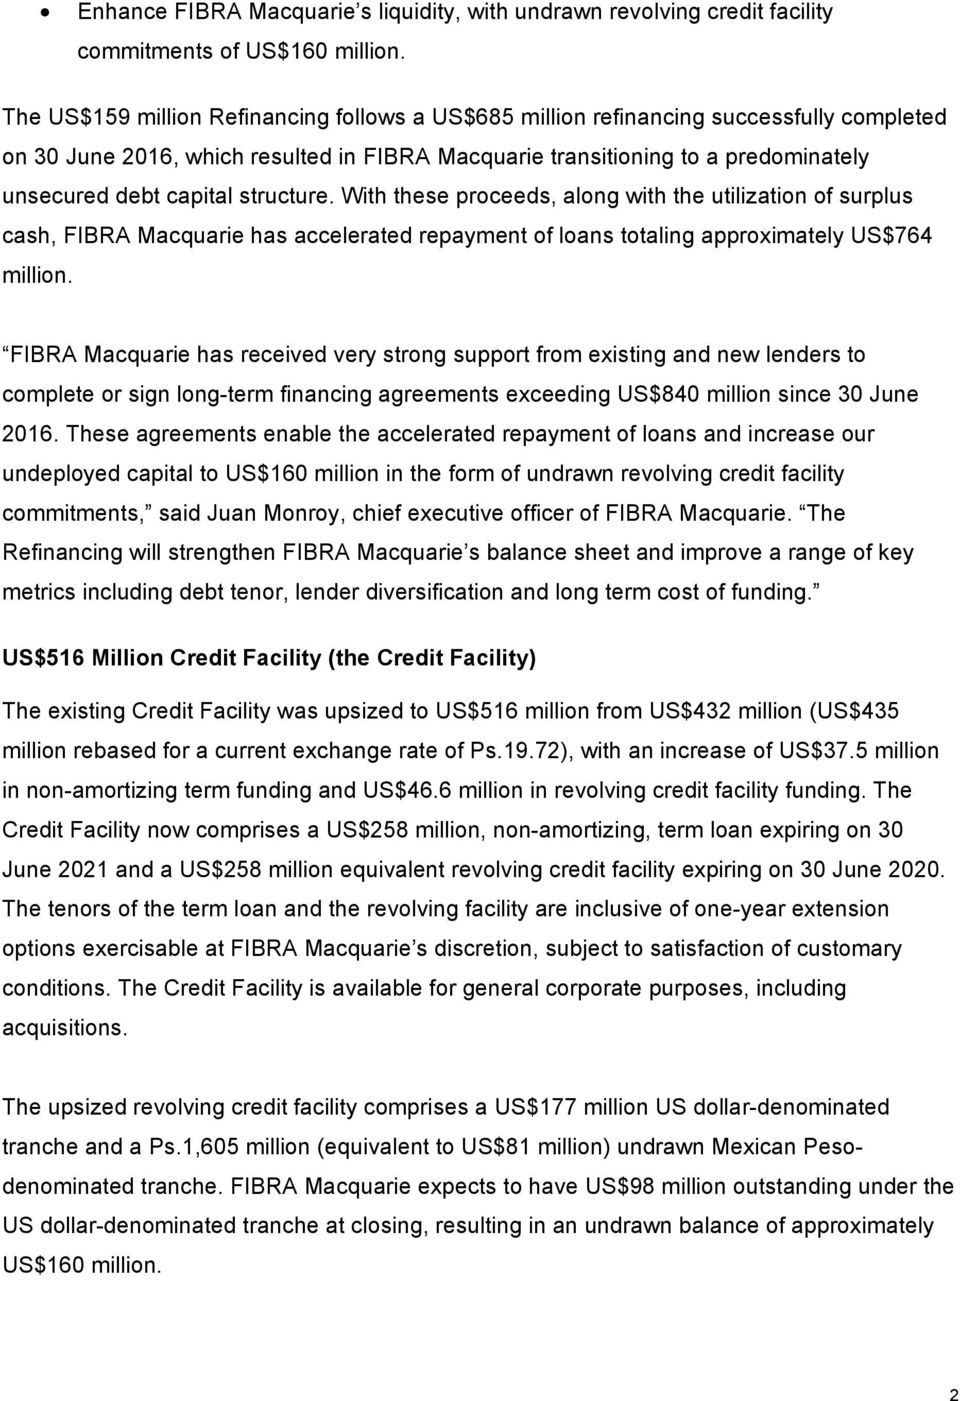 structure. With these proceeds, along with the utilization of surplus cash, FIBRA Macquarie has accelerated repayment of loans totaling approximately US$764 million.